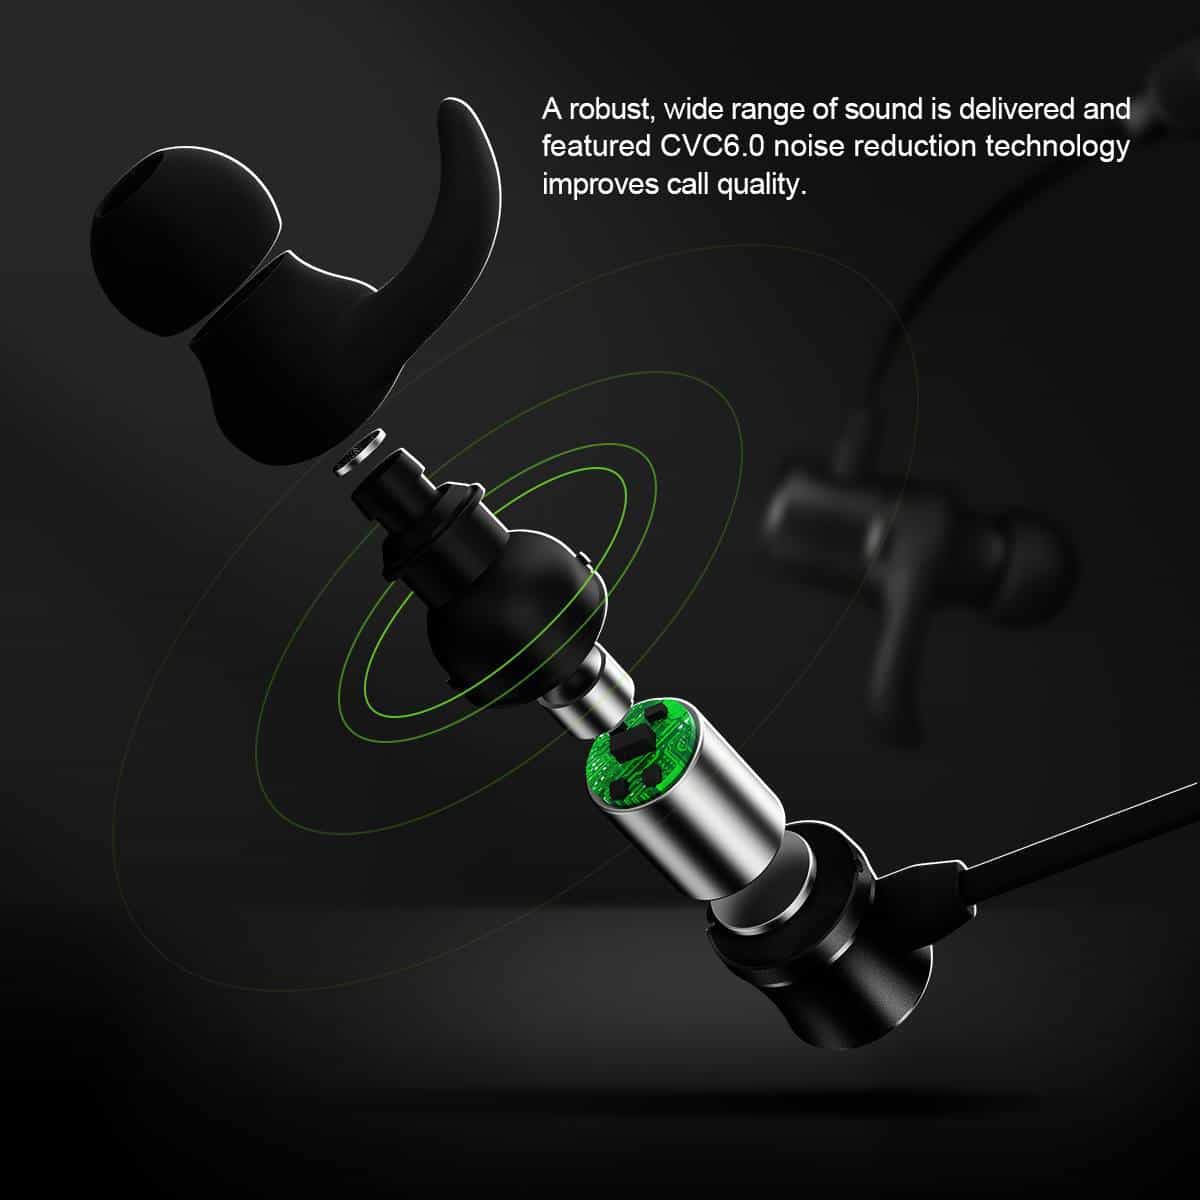 Iteknic ik-bh001 wireless stereo headset with up to 24 hrs playback launching december 28